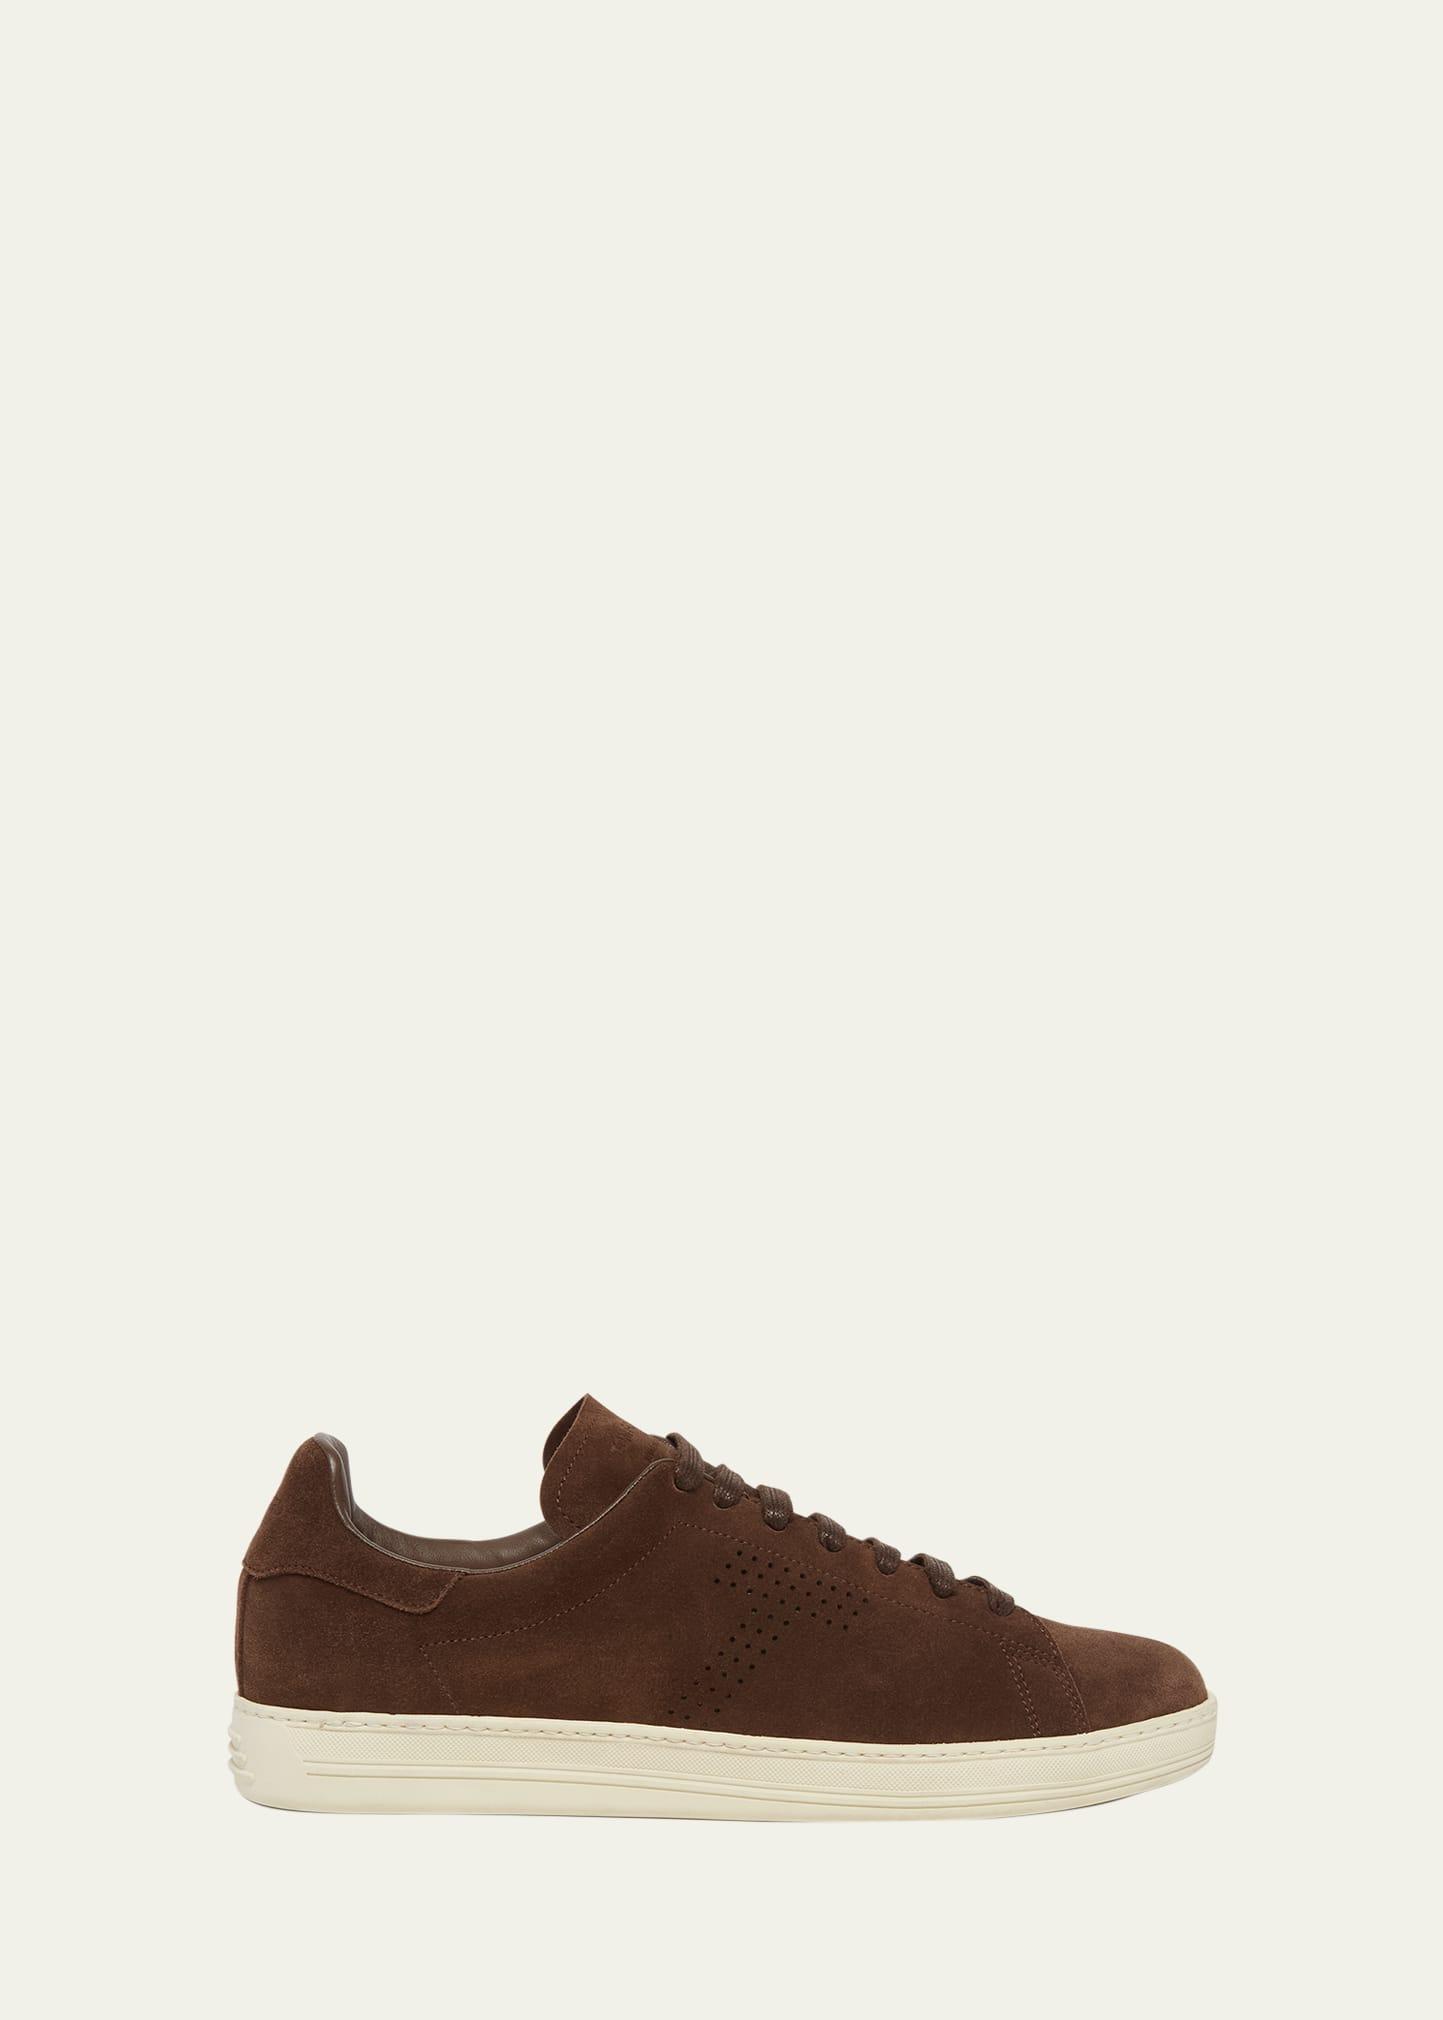 Mens Warwick Suede Sneakers Product Image